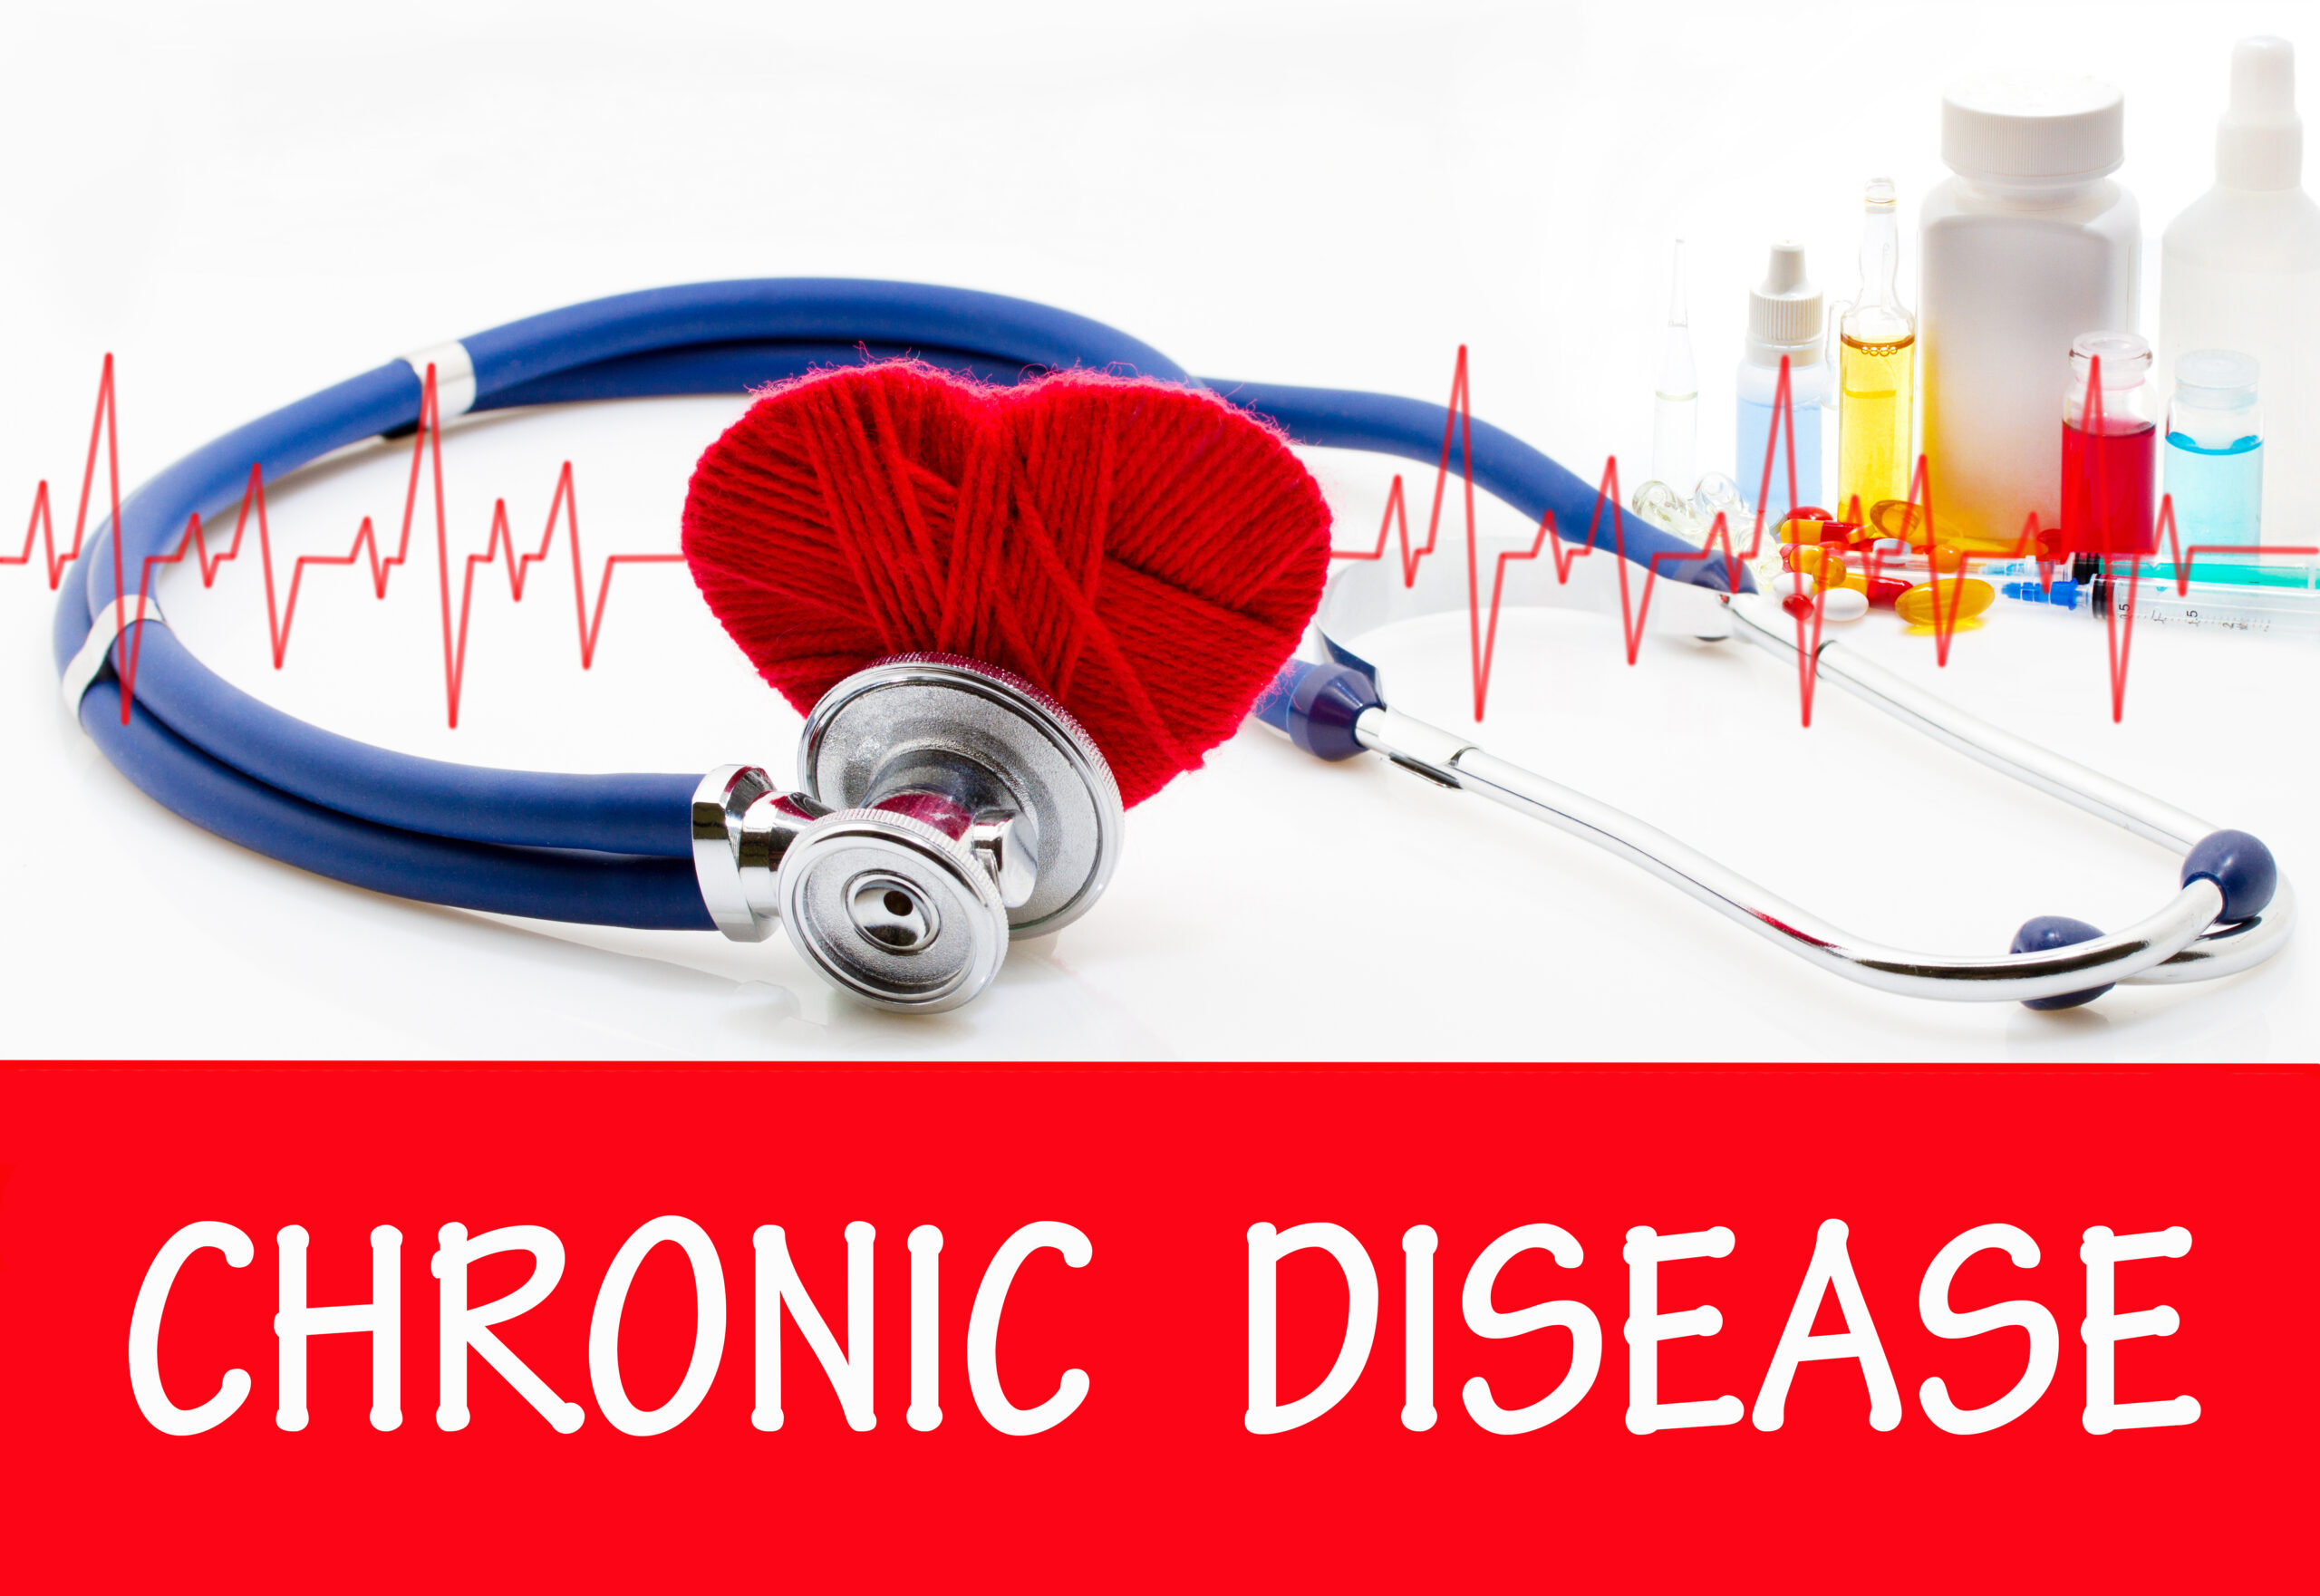 Those With Chronic Disease May Not Be Active Enough